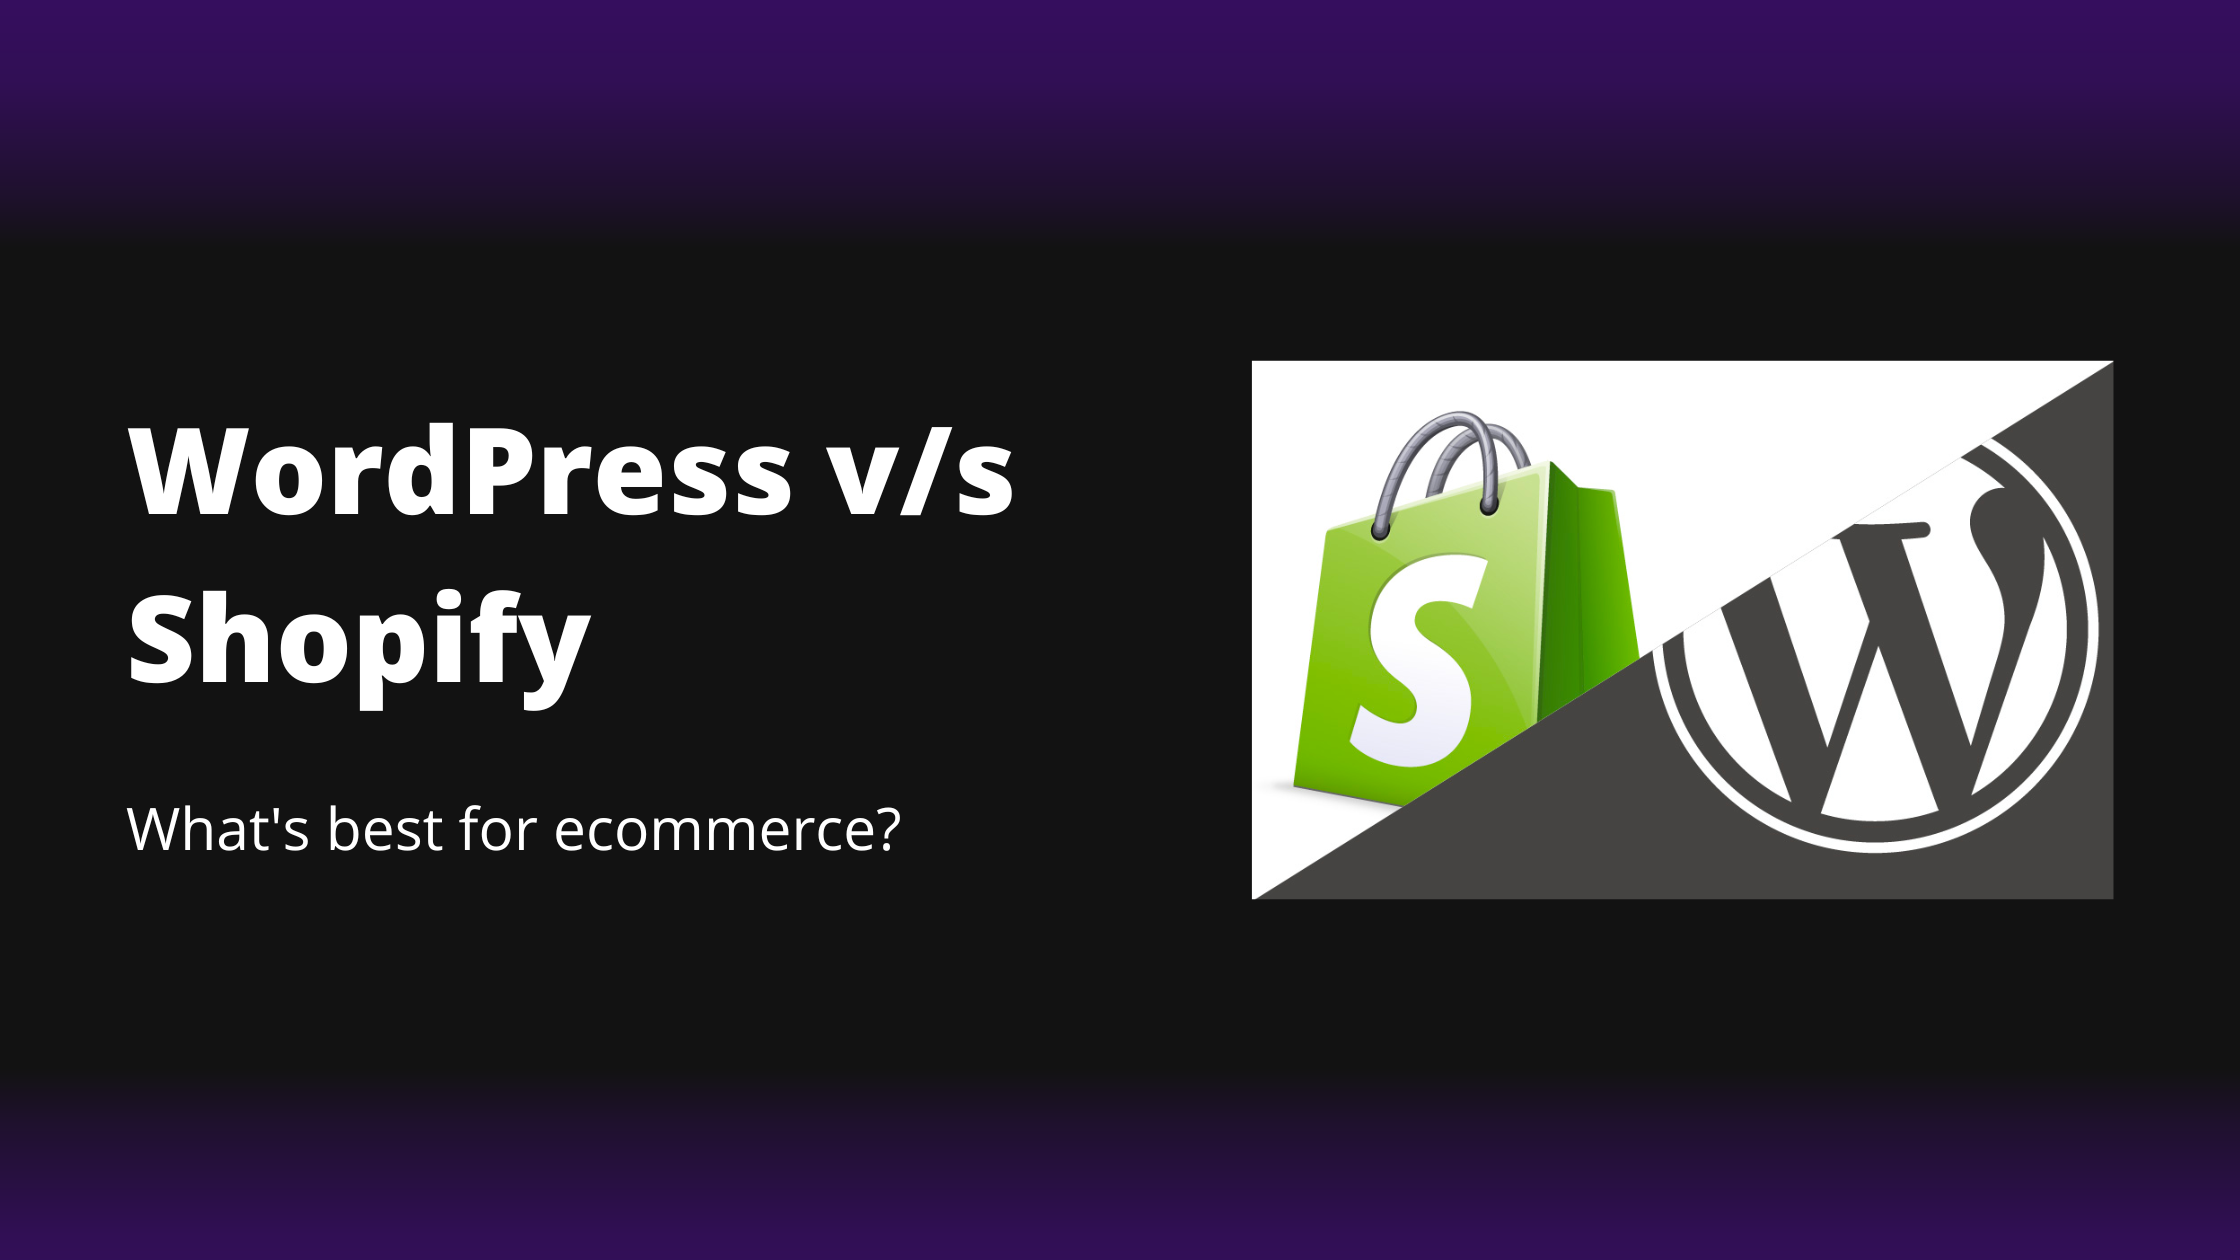 WordPress vs Shopify. What’s best for ecommerce?